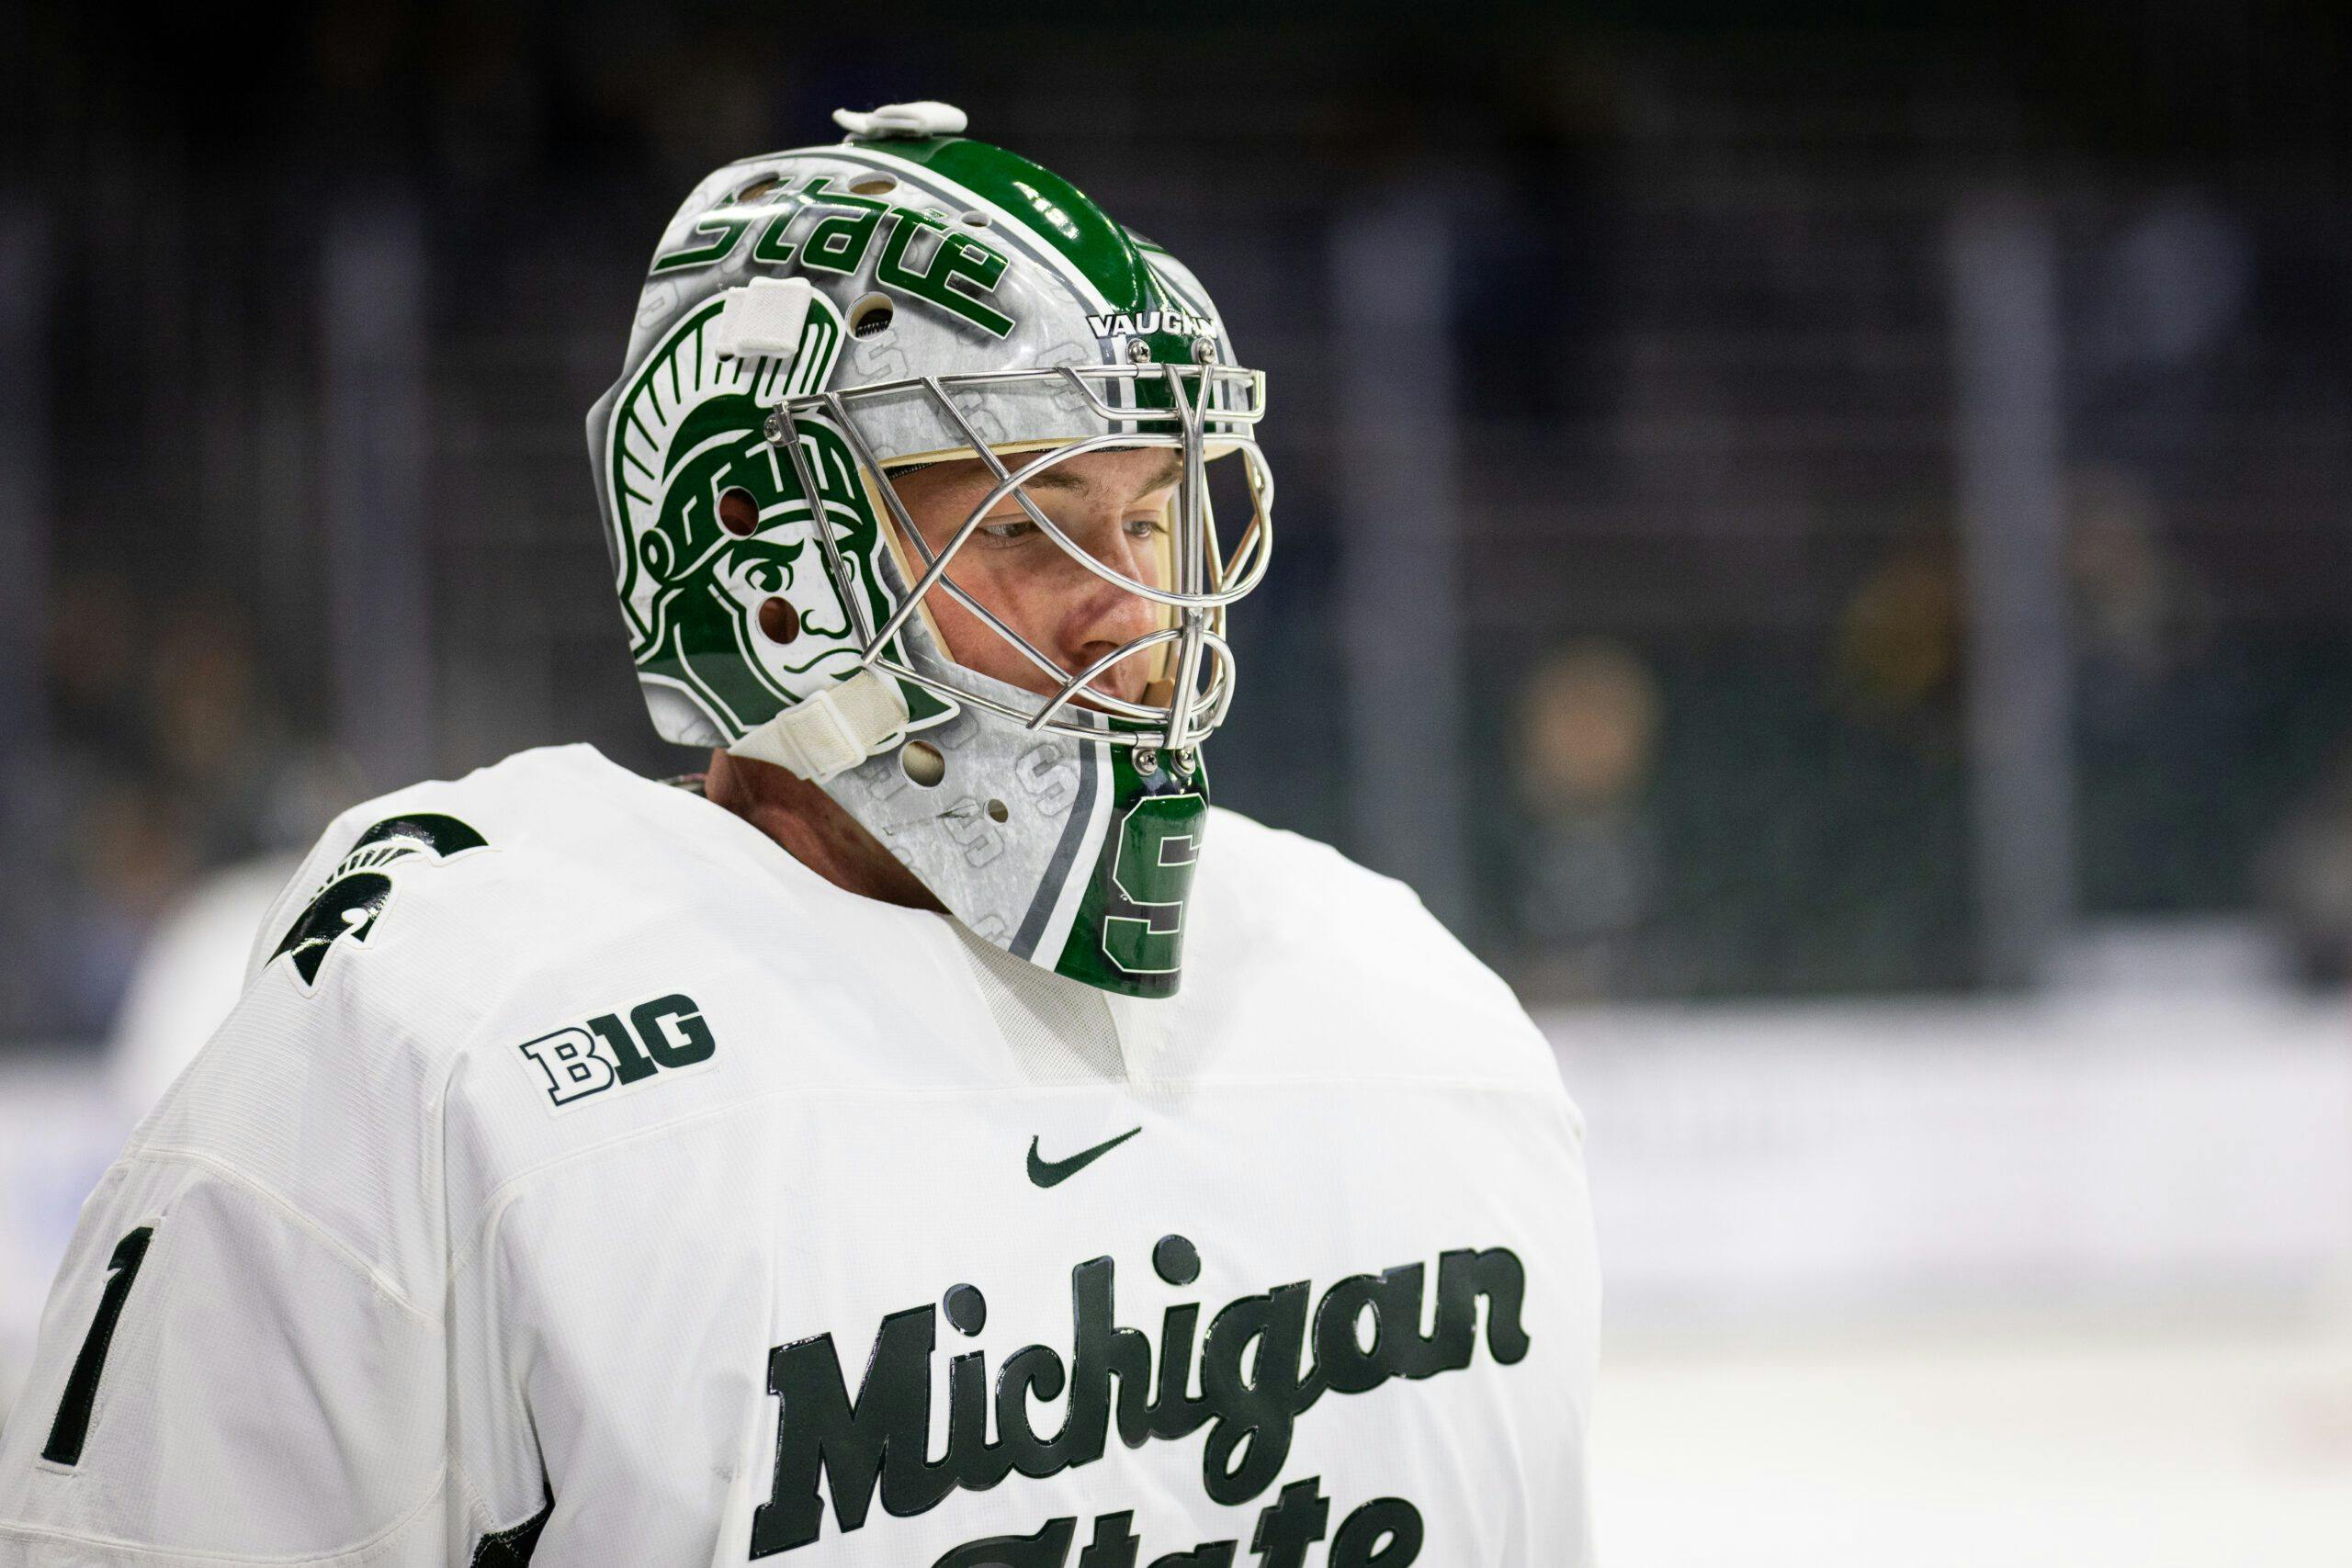 Top 10 NHL prospects that have stood out as NCAA freshmen